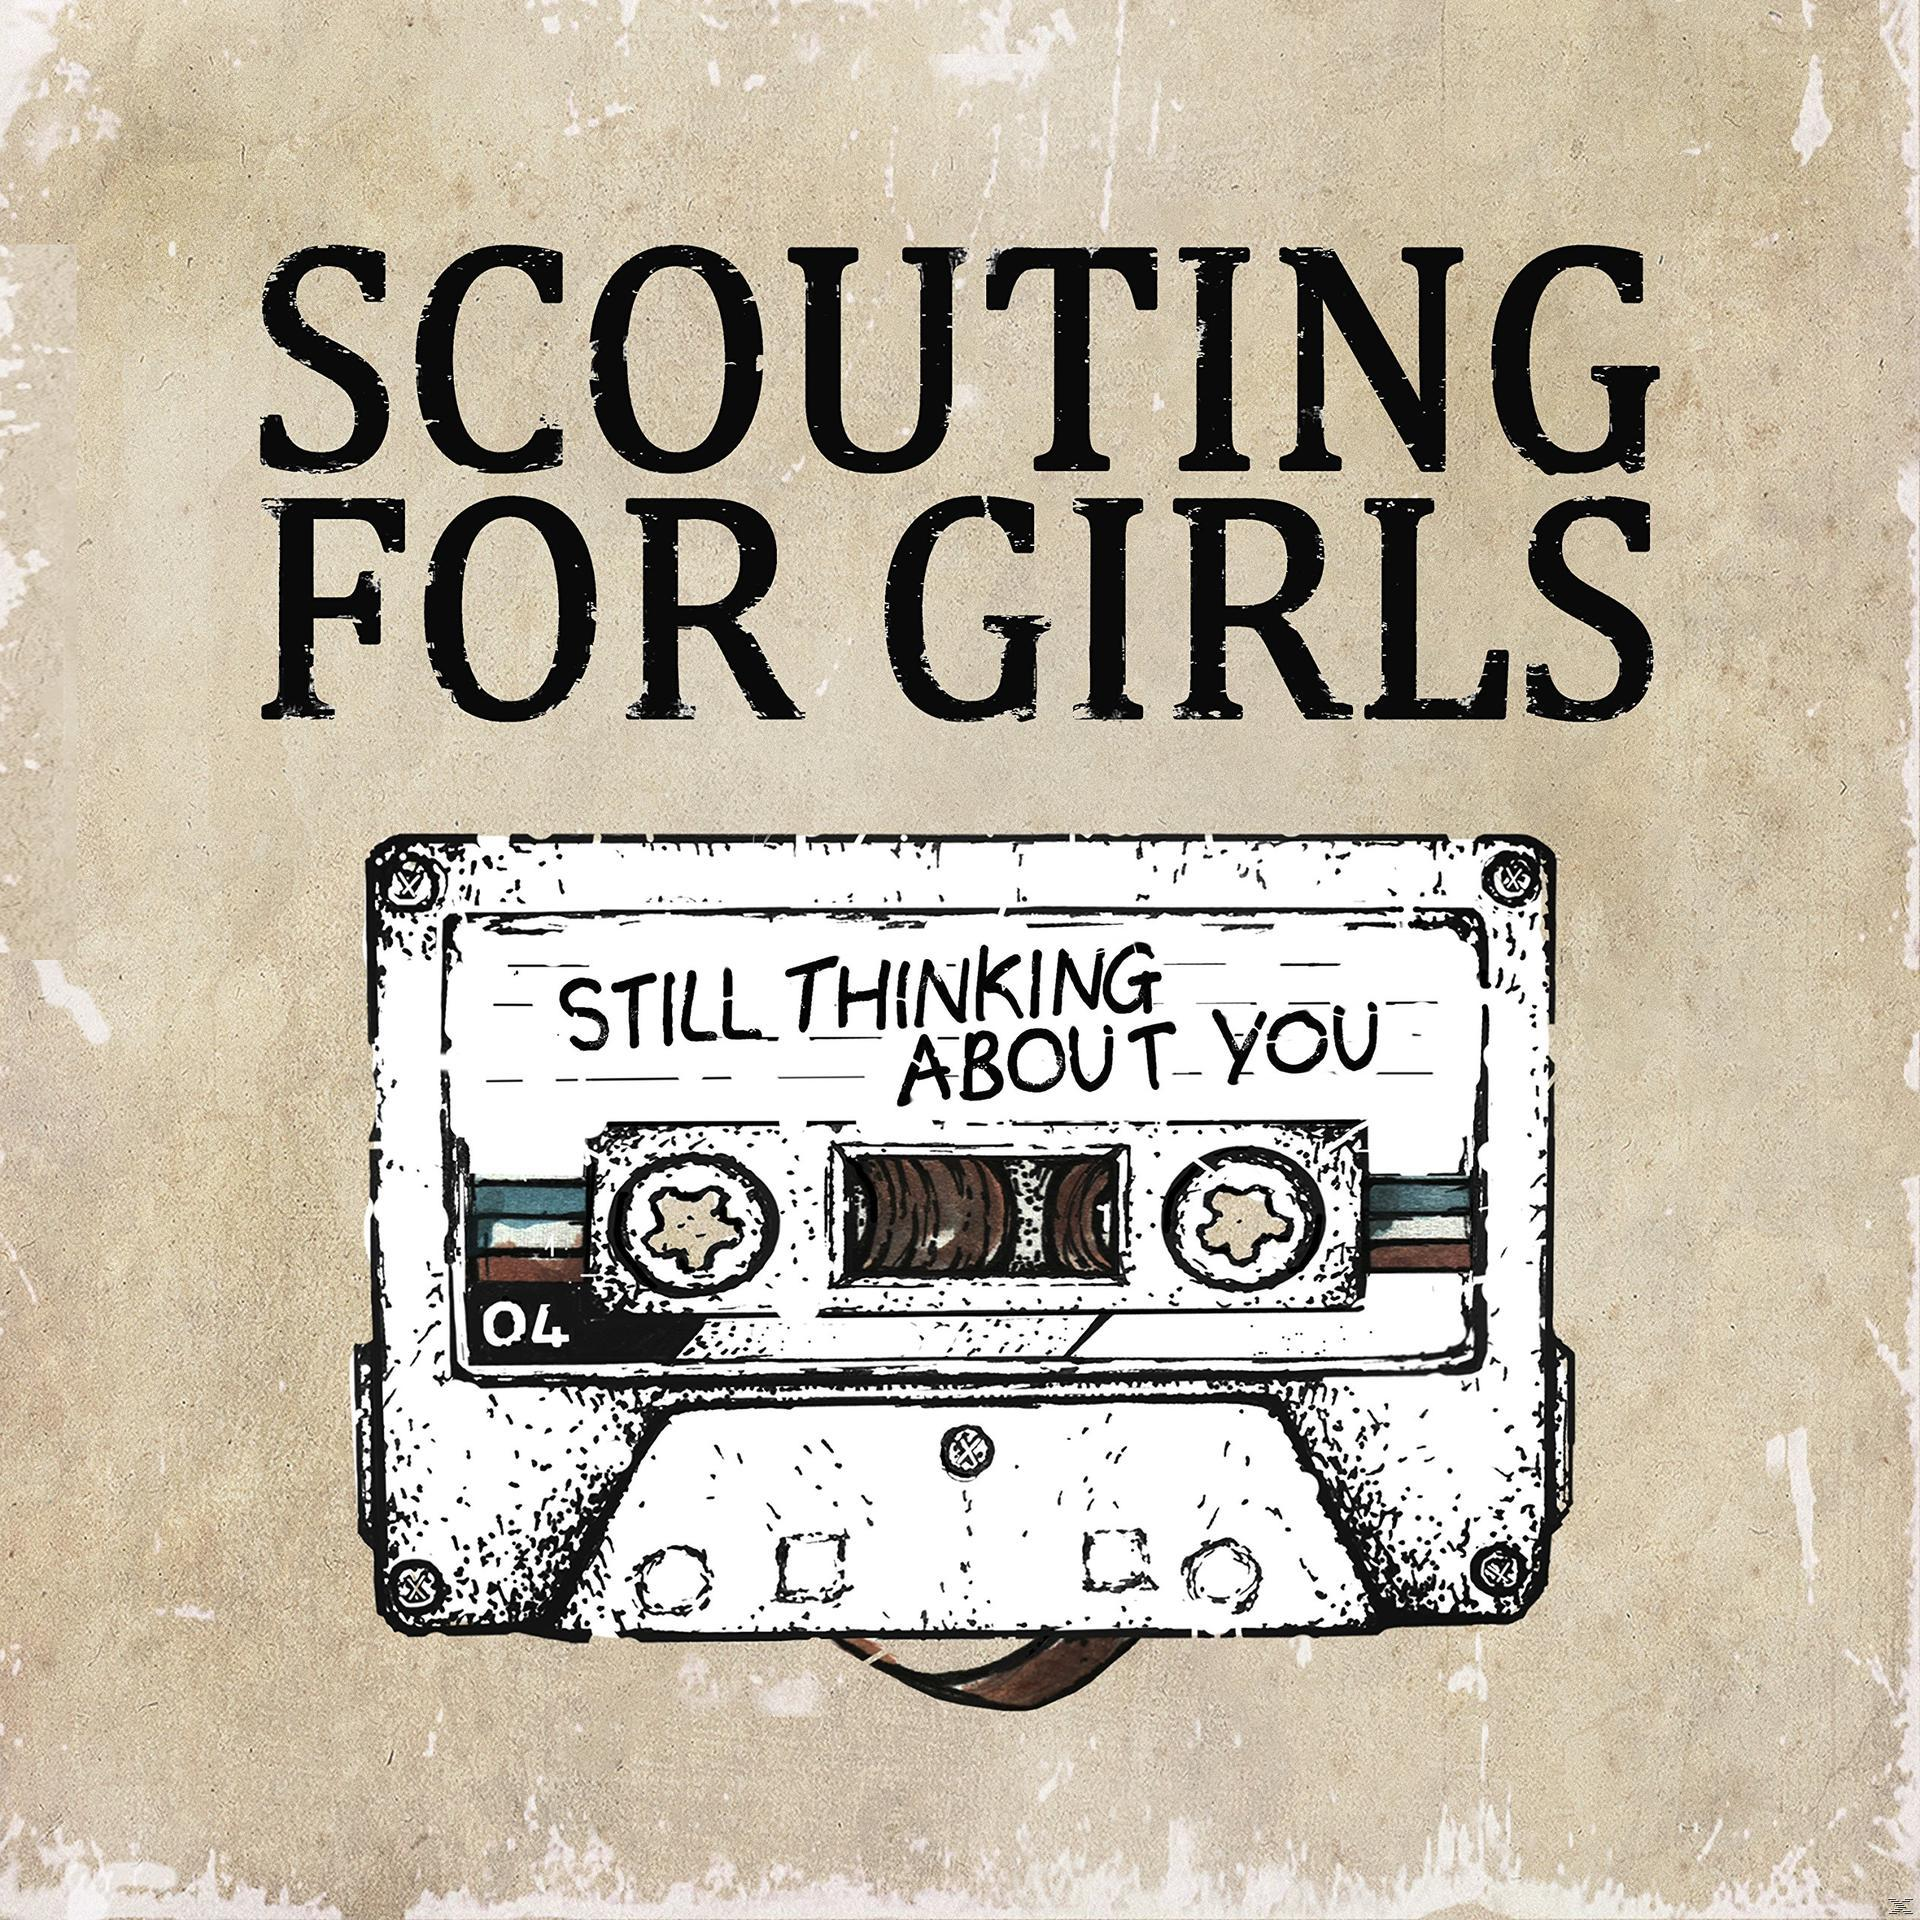 Scouting For Girls You (CD) About - Thinking - Still